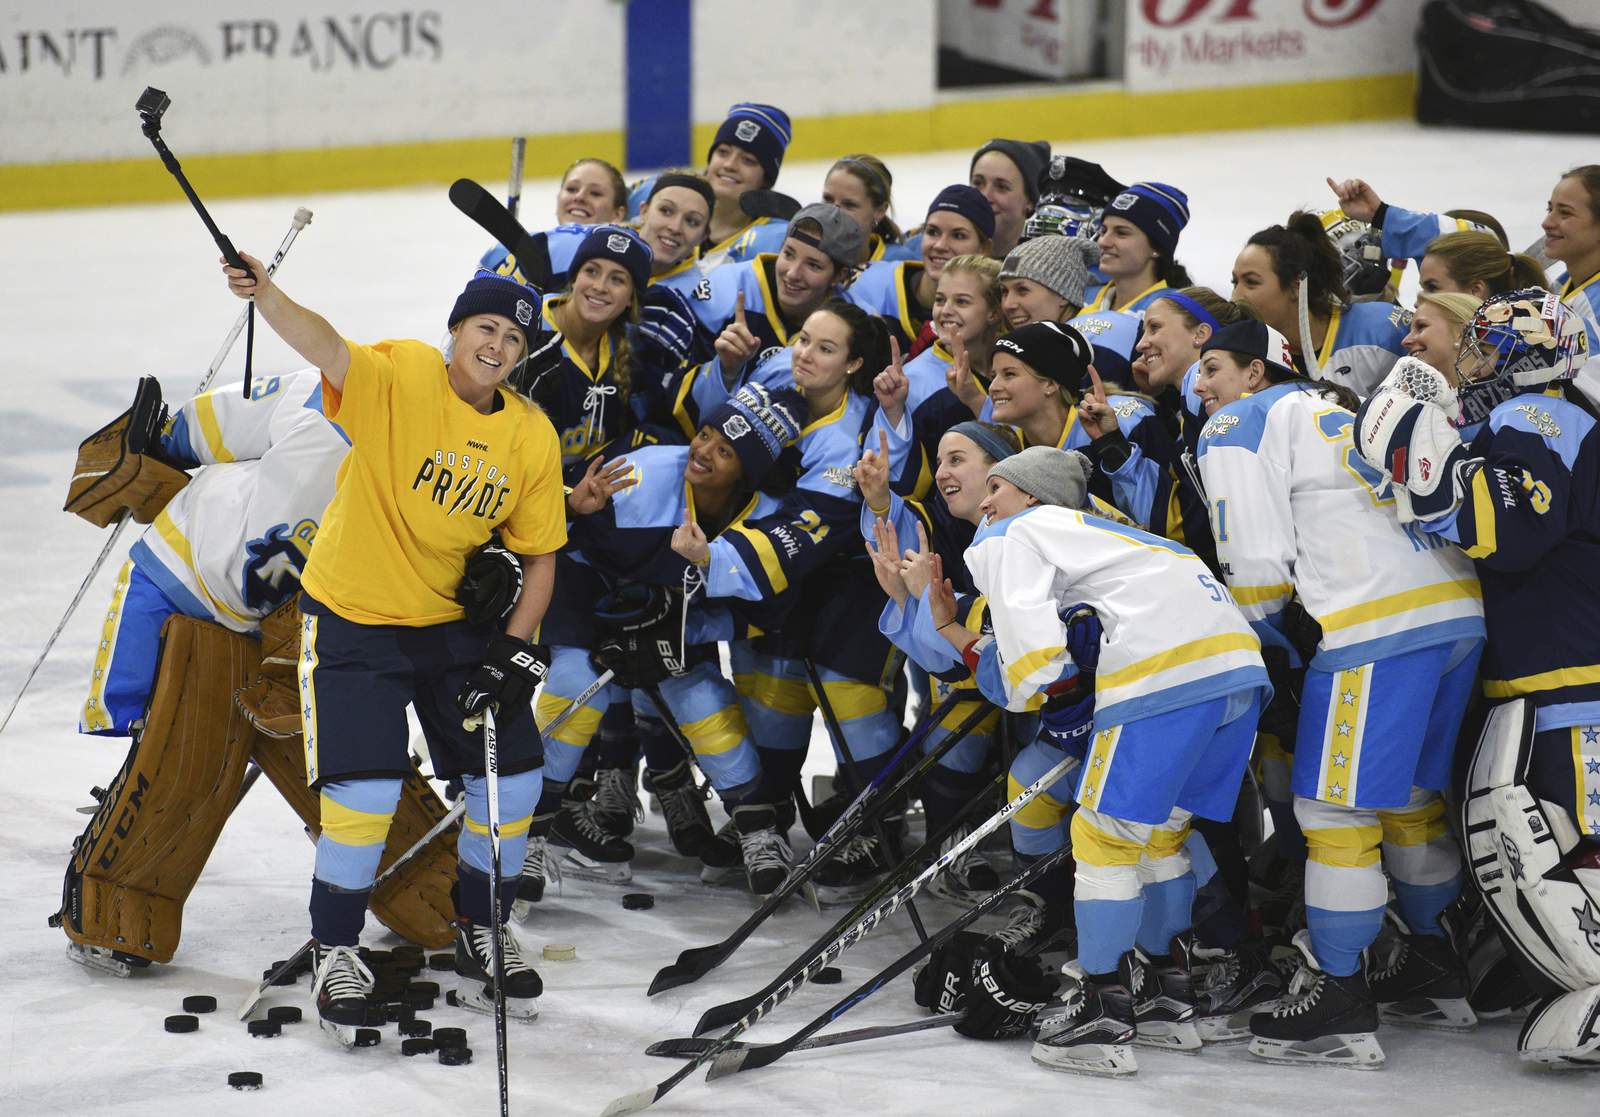 NWHL semifinals, final to air live on NBCSN in February